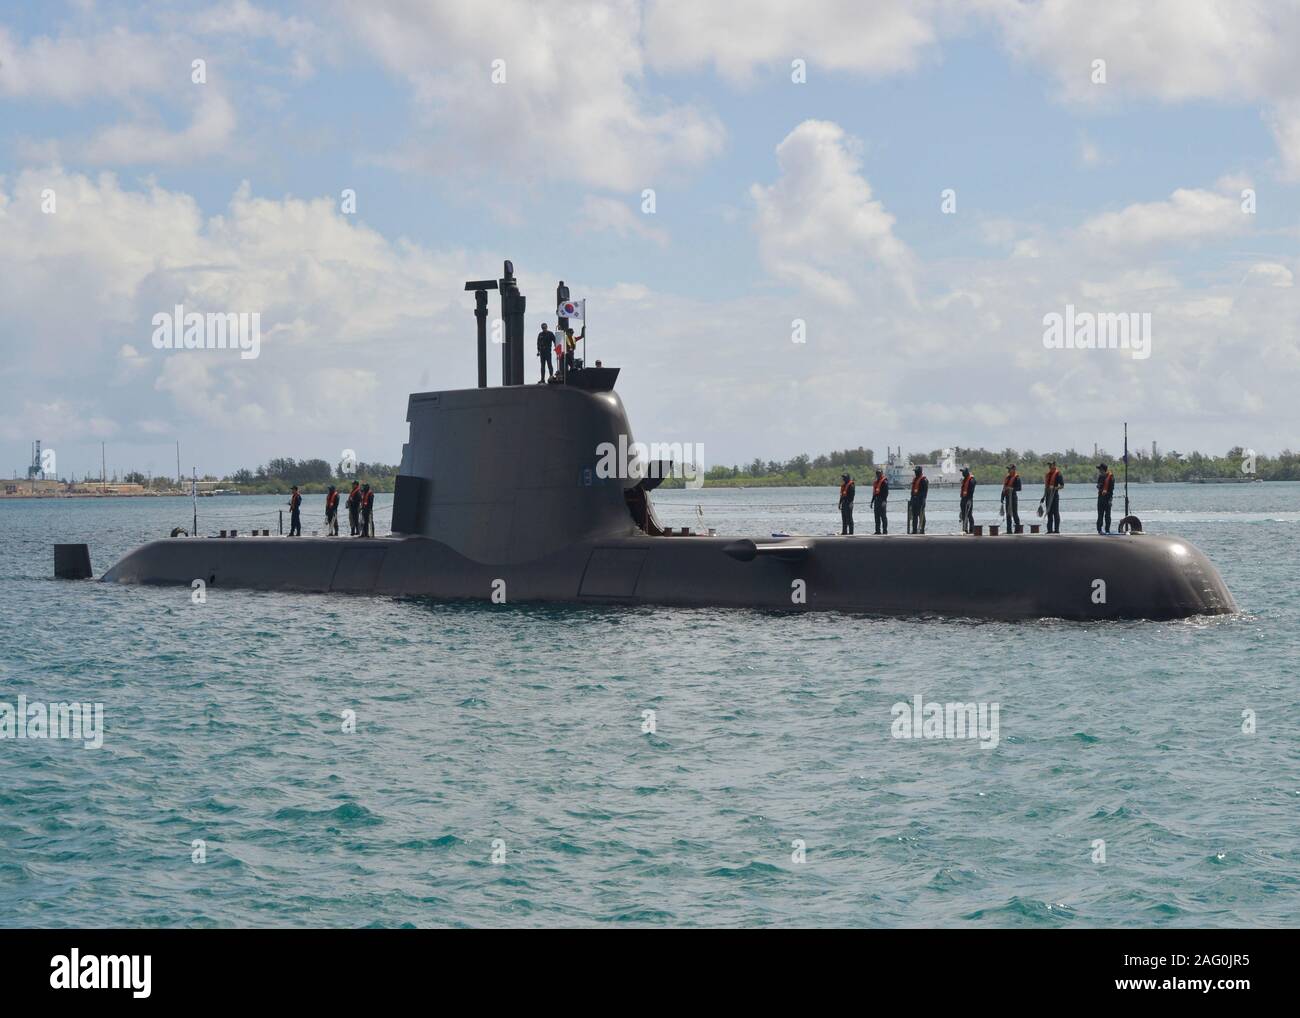 Republic of Korea sailors aboard the Sohn Wonyil class diesel-electric submarine ROKS Yun Bonggil prepare for docking at Naval Base Guam June 5, 2019 in Santa Rita, Guam. Naval Base Guam is home to four Los Angeles-class attack submarines in the 7th Fleet and supports allied operations in Asia. Stock Photo